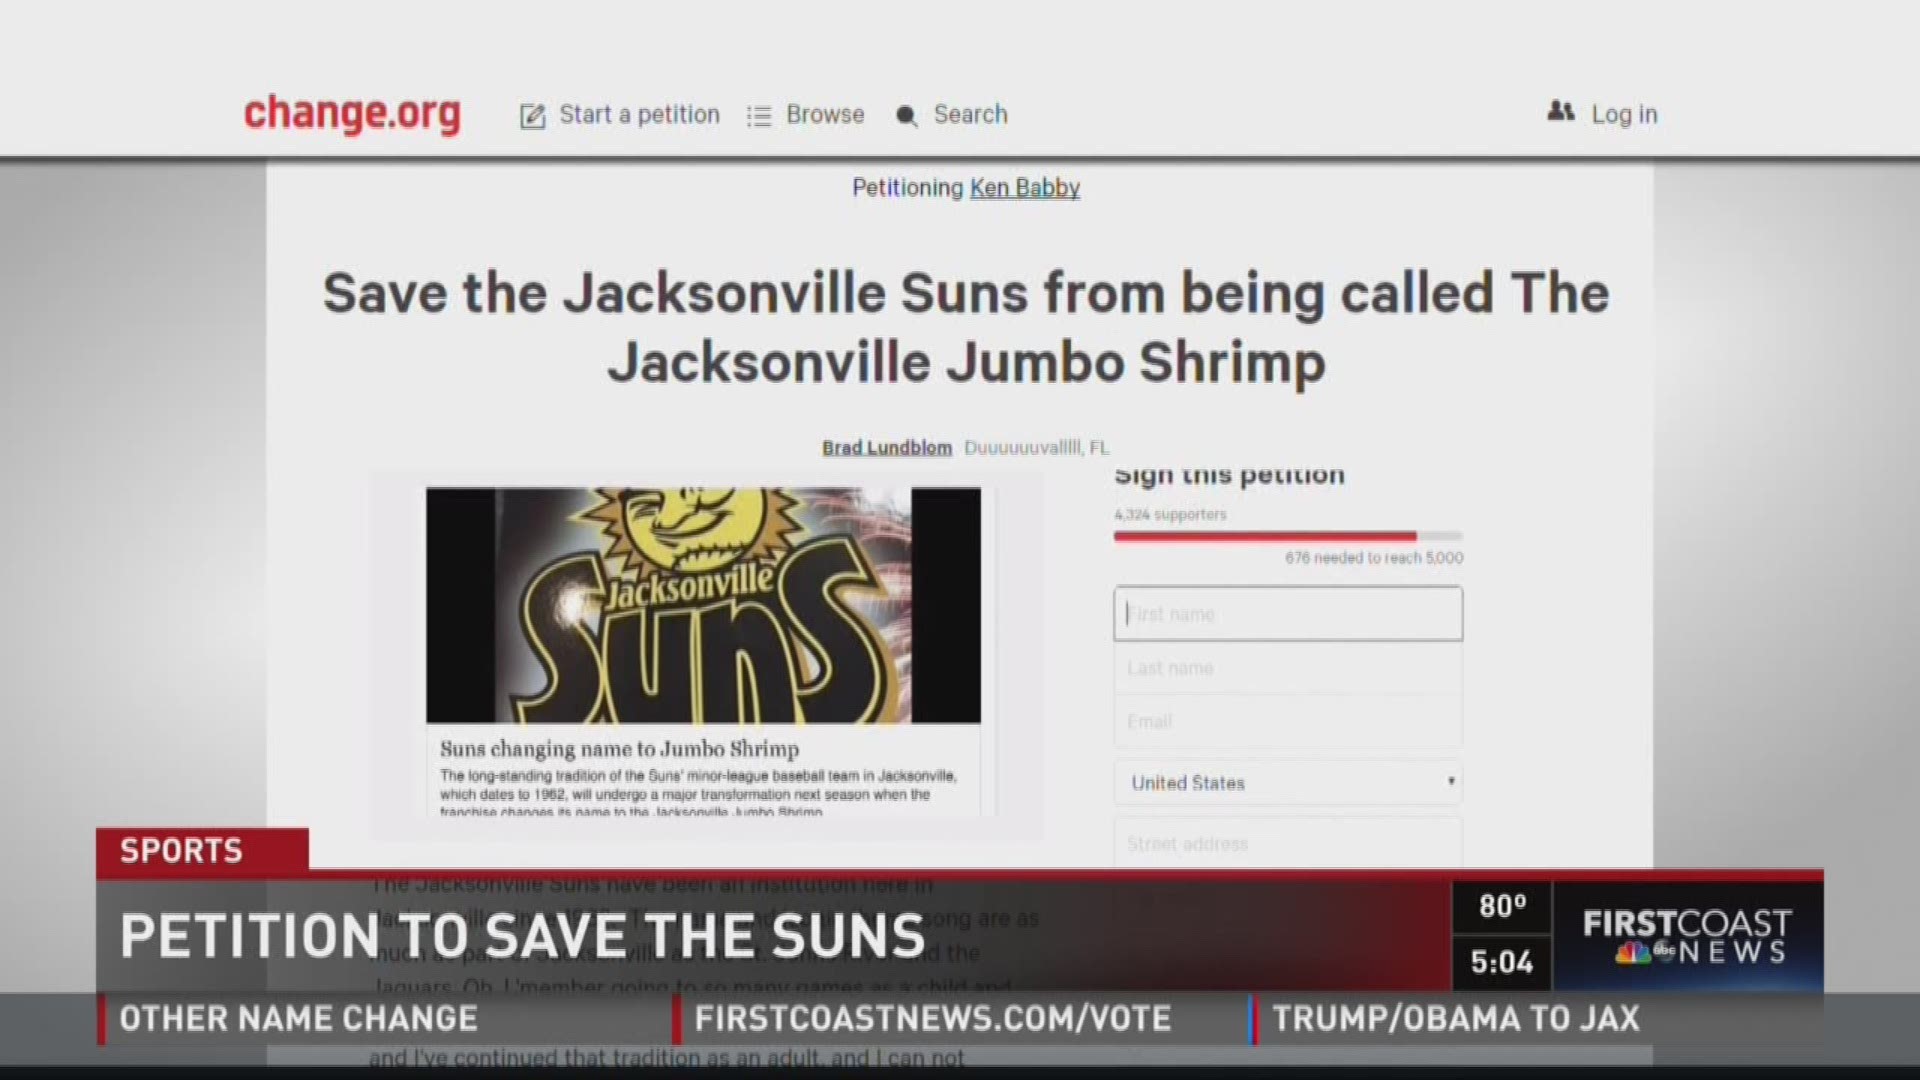 Petition to "Save the Suns" from Jumbo Shrimp name change